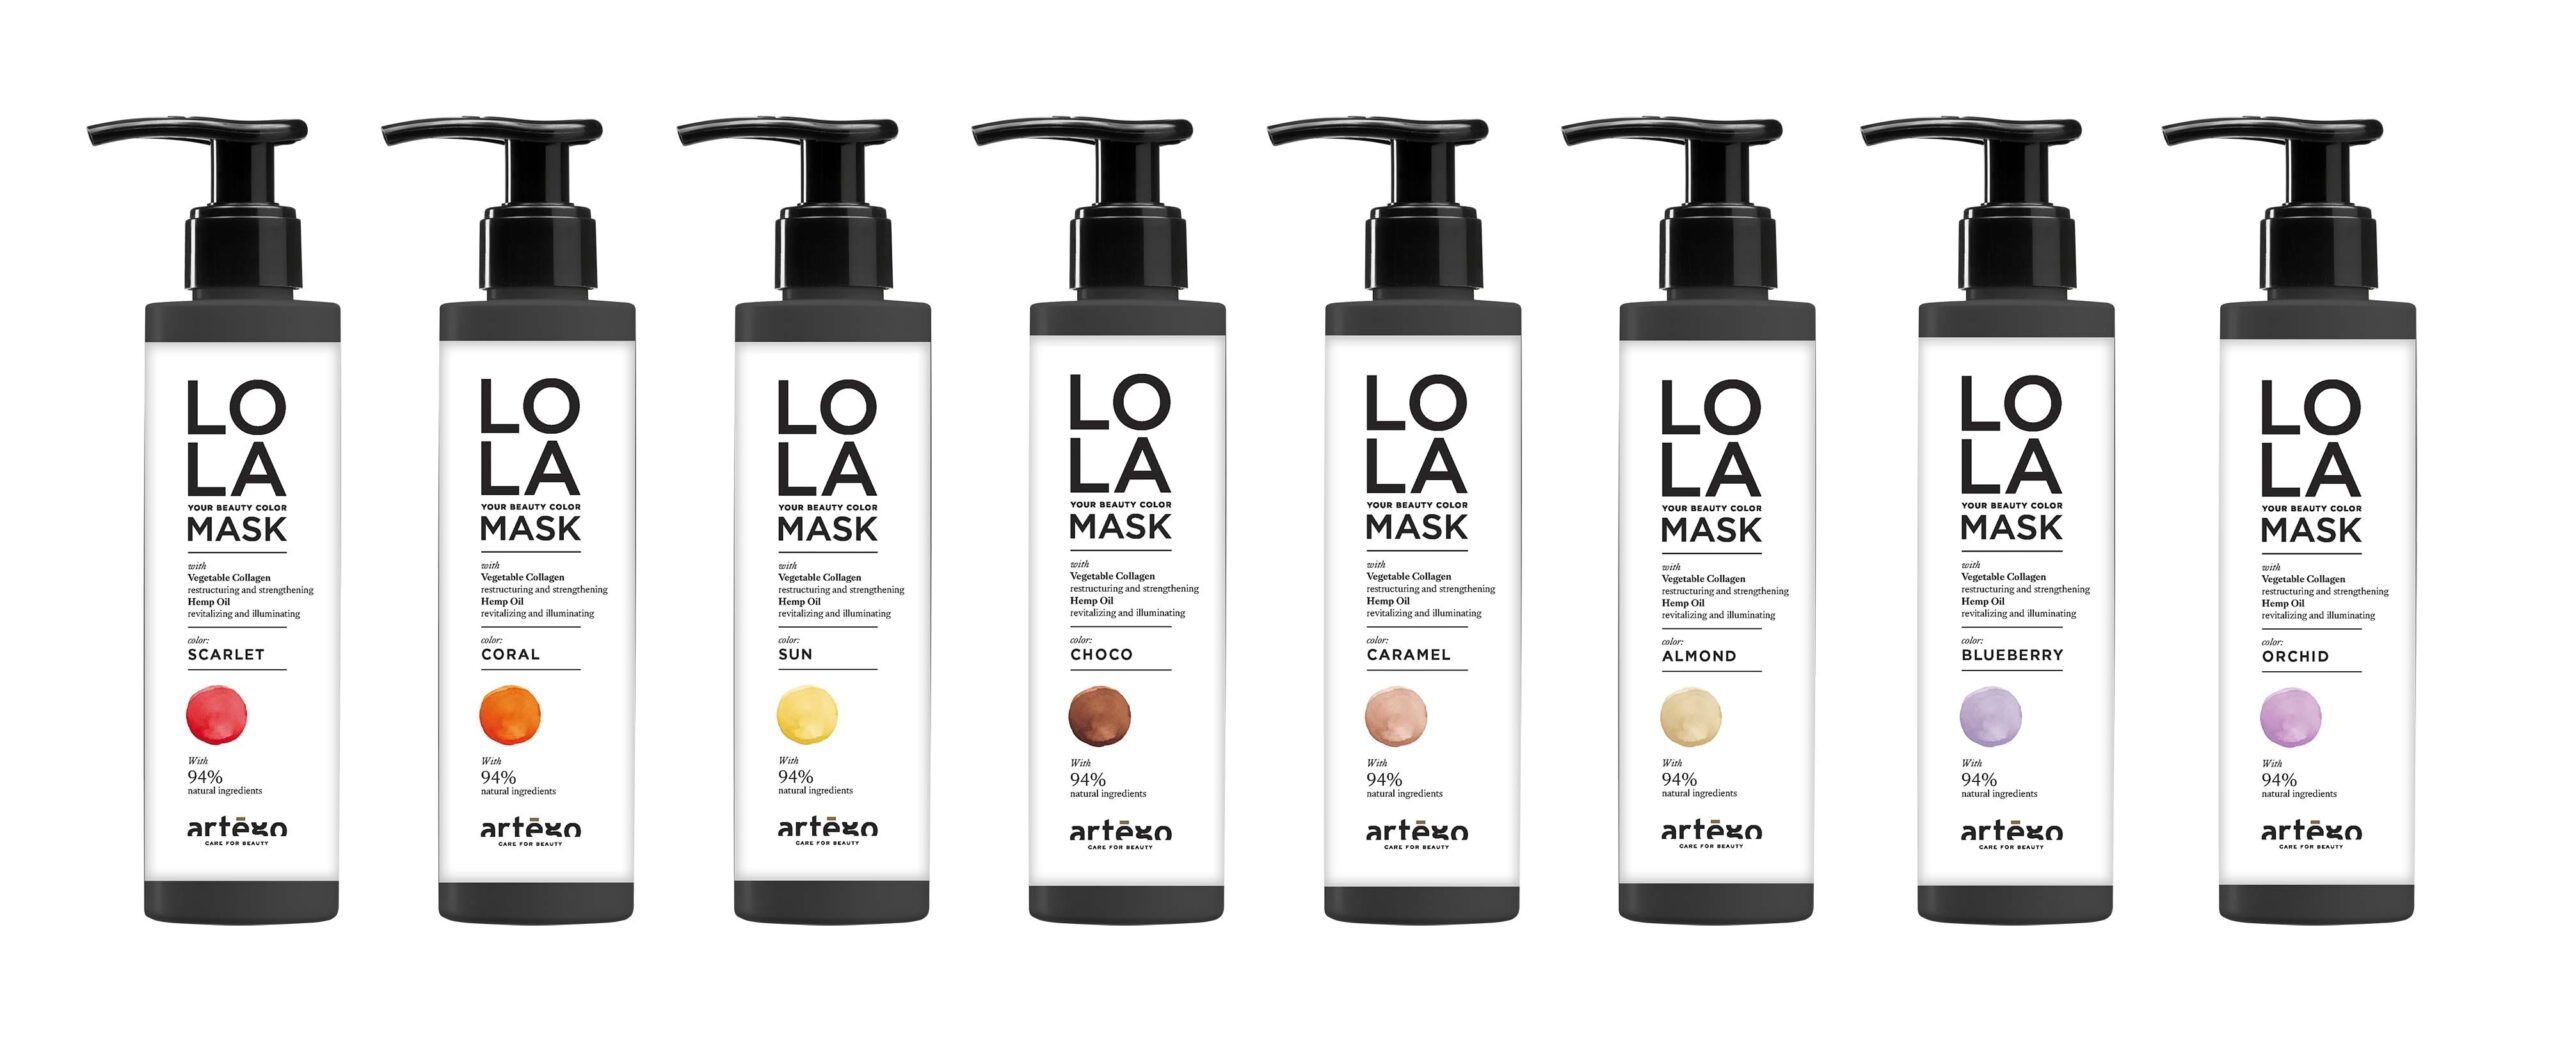 LOLA Mask Color bottle varieties in a row